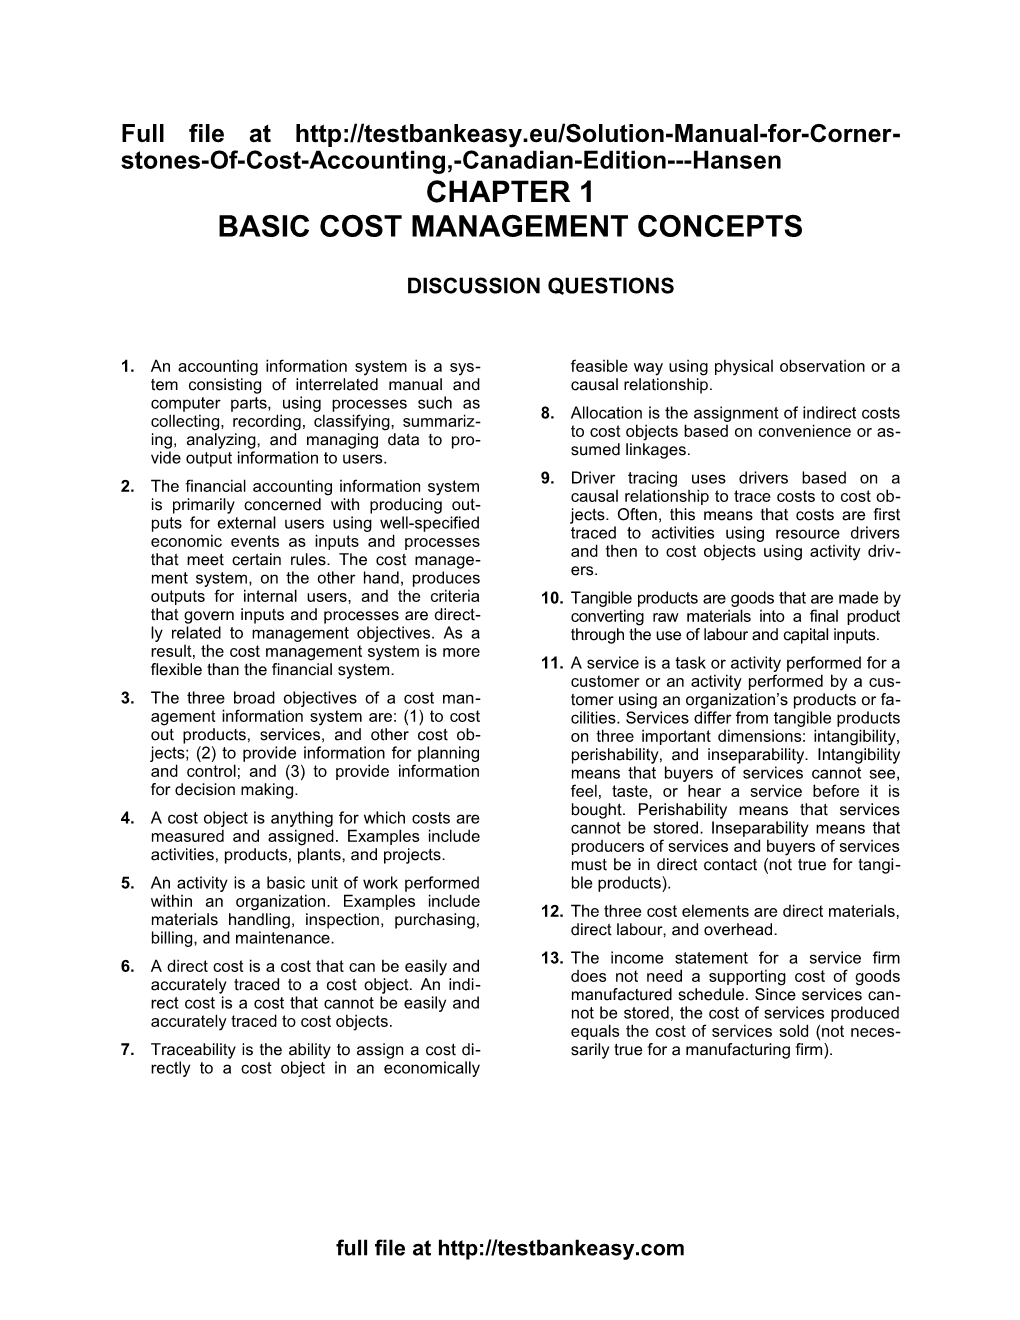 Chapter 1Basic Cost Management Concepts